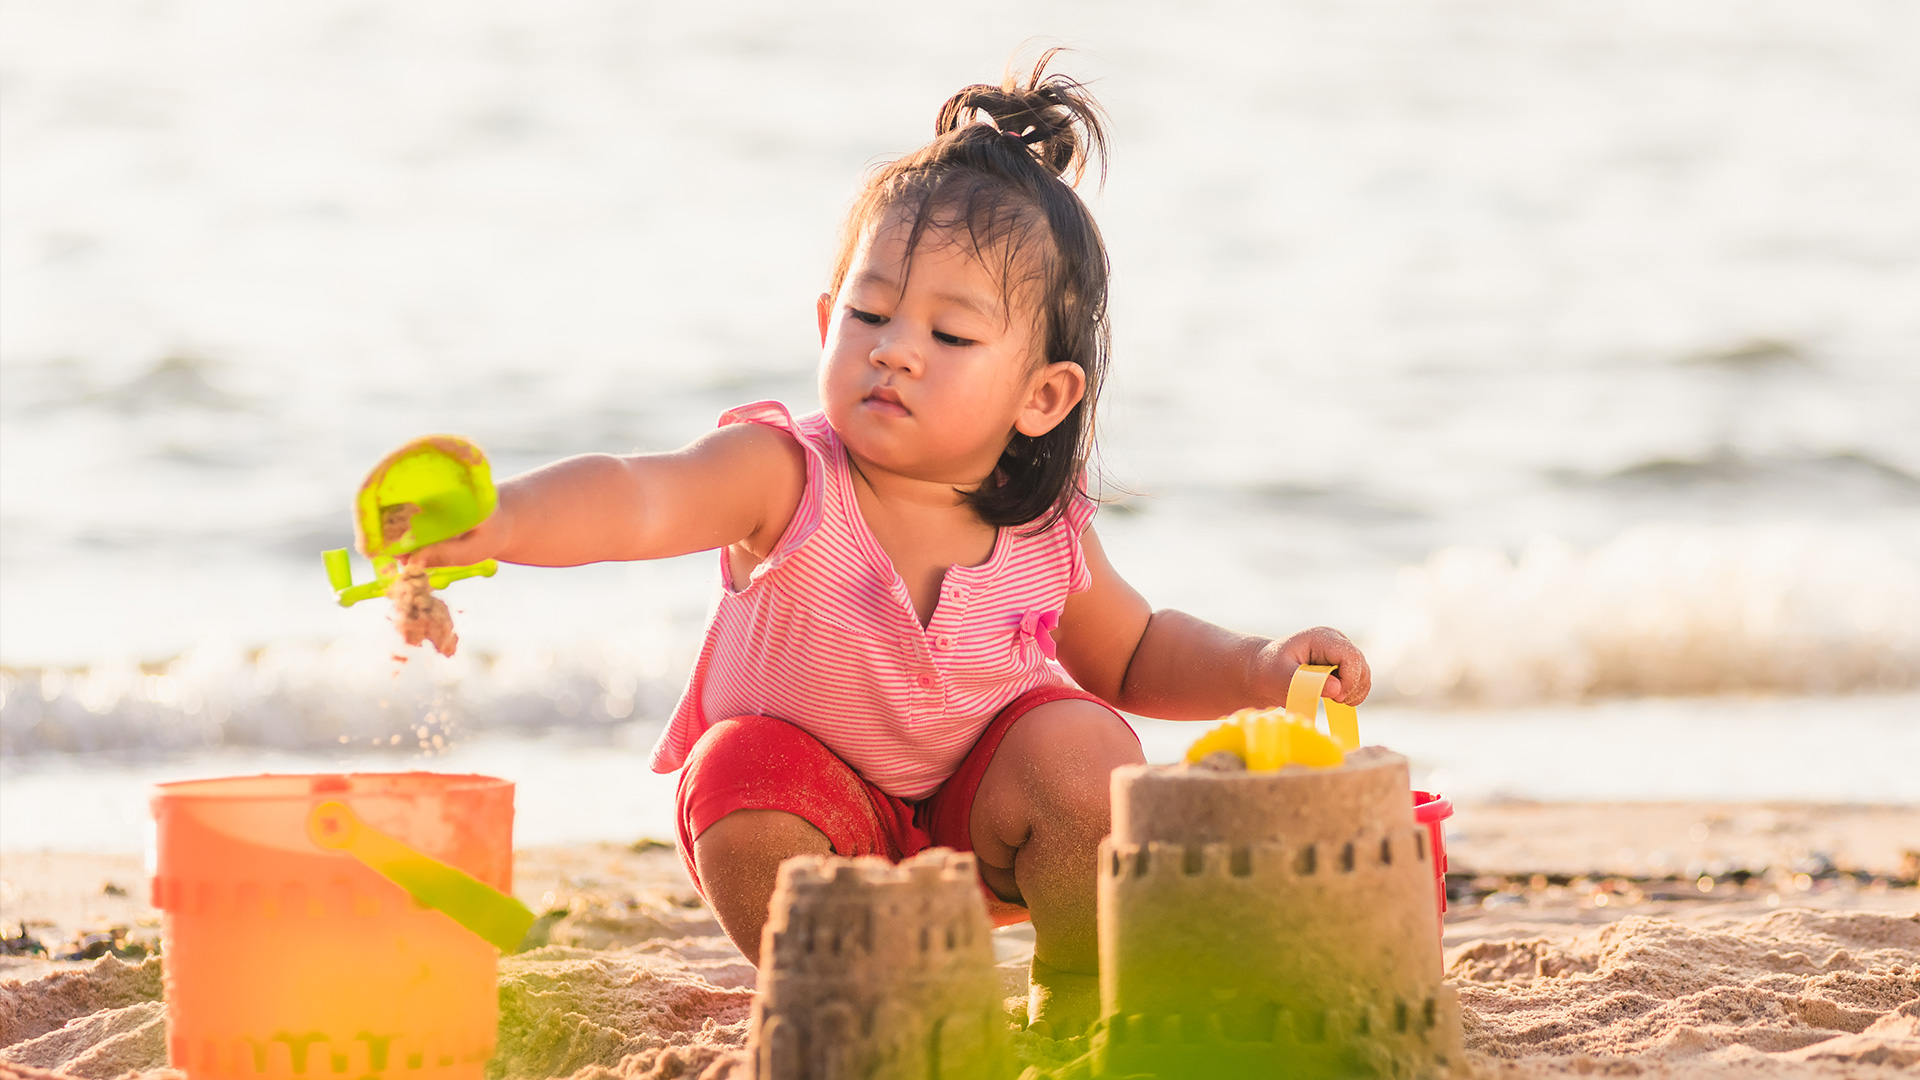 When they grow up, children who spend more time on the beach are less likely to develop depression.